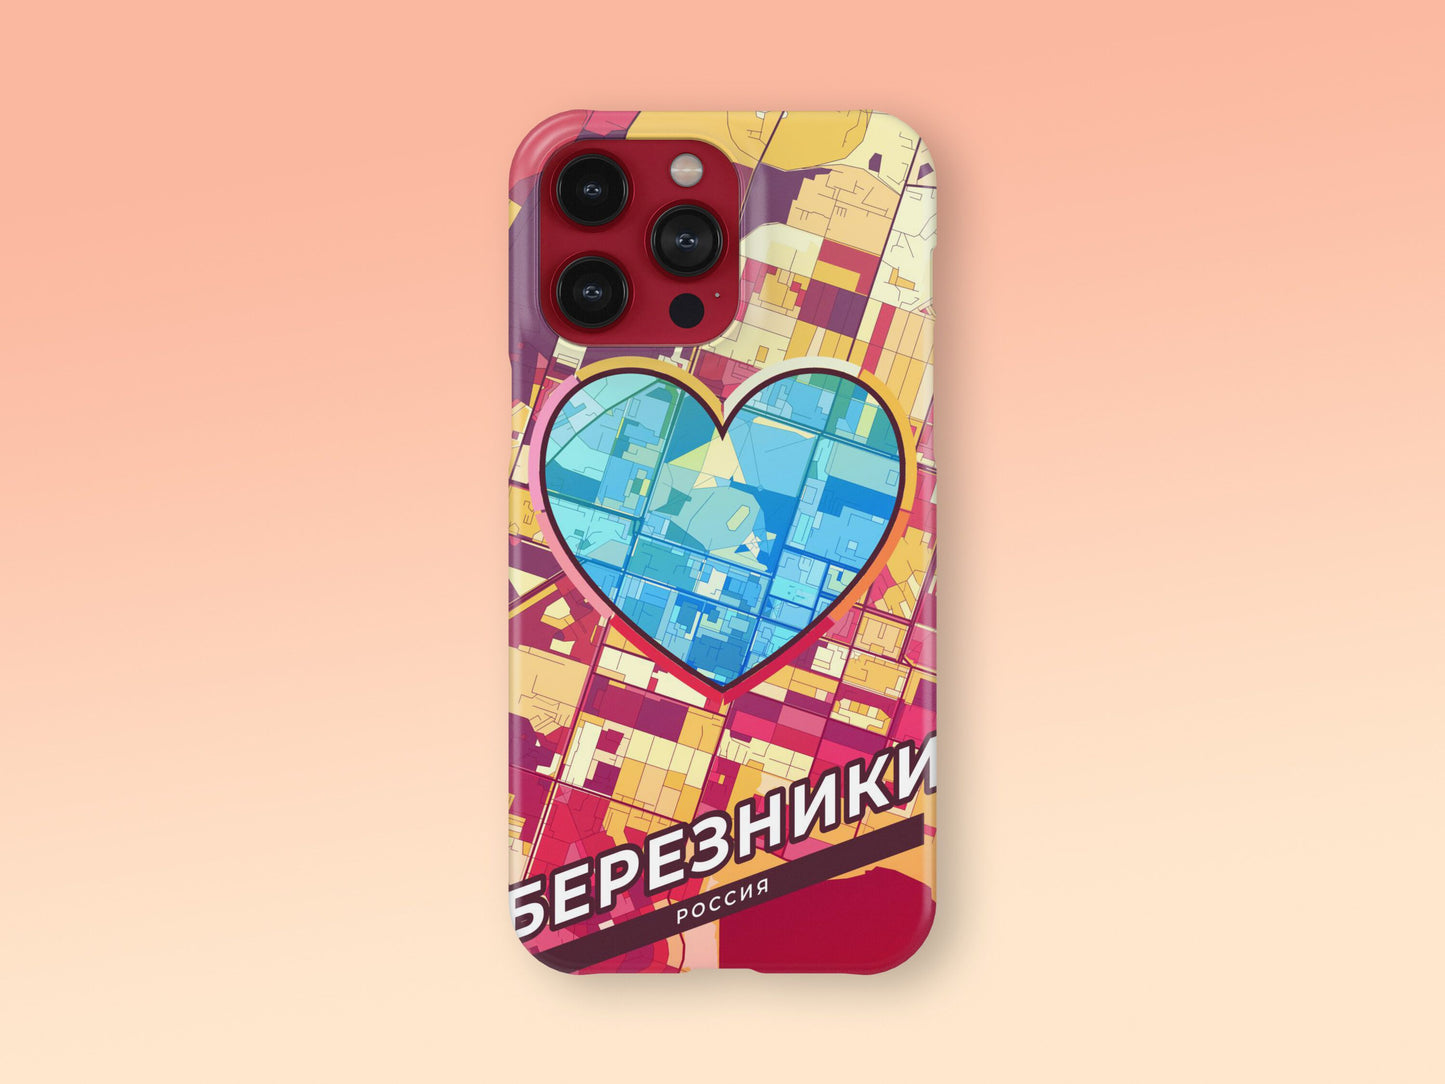 Berezniki Russia slim phone case with colorful icon. Birthday, wedding or housewarming gift. Couple match cases. 2